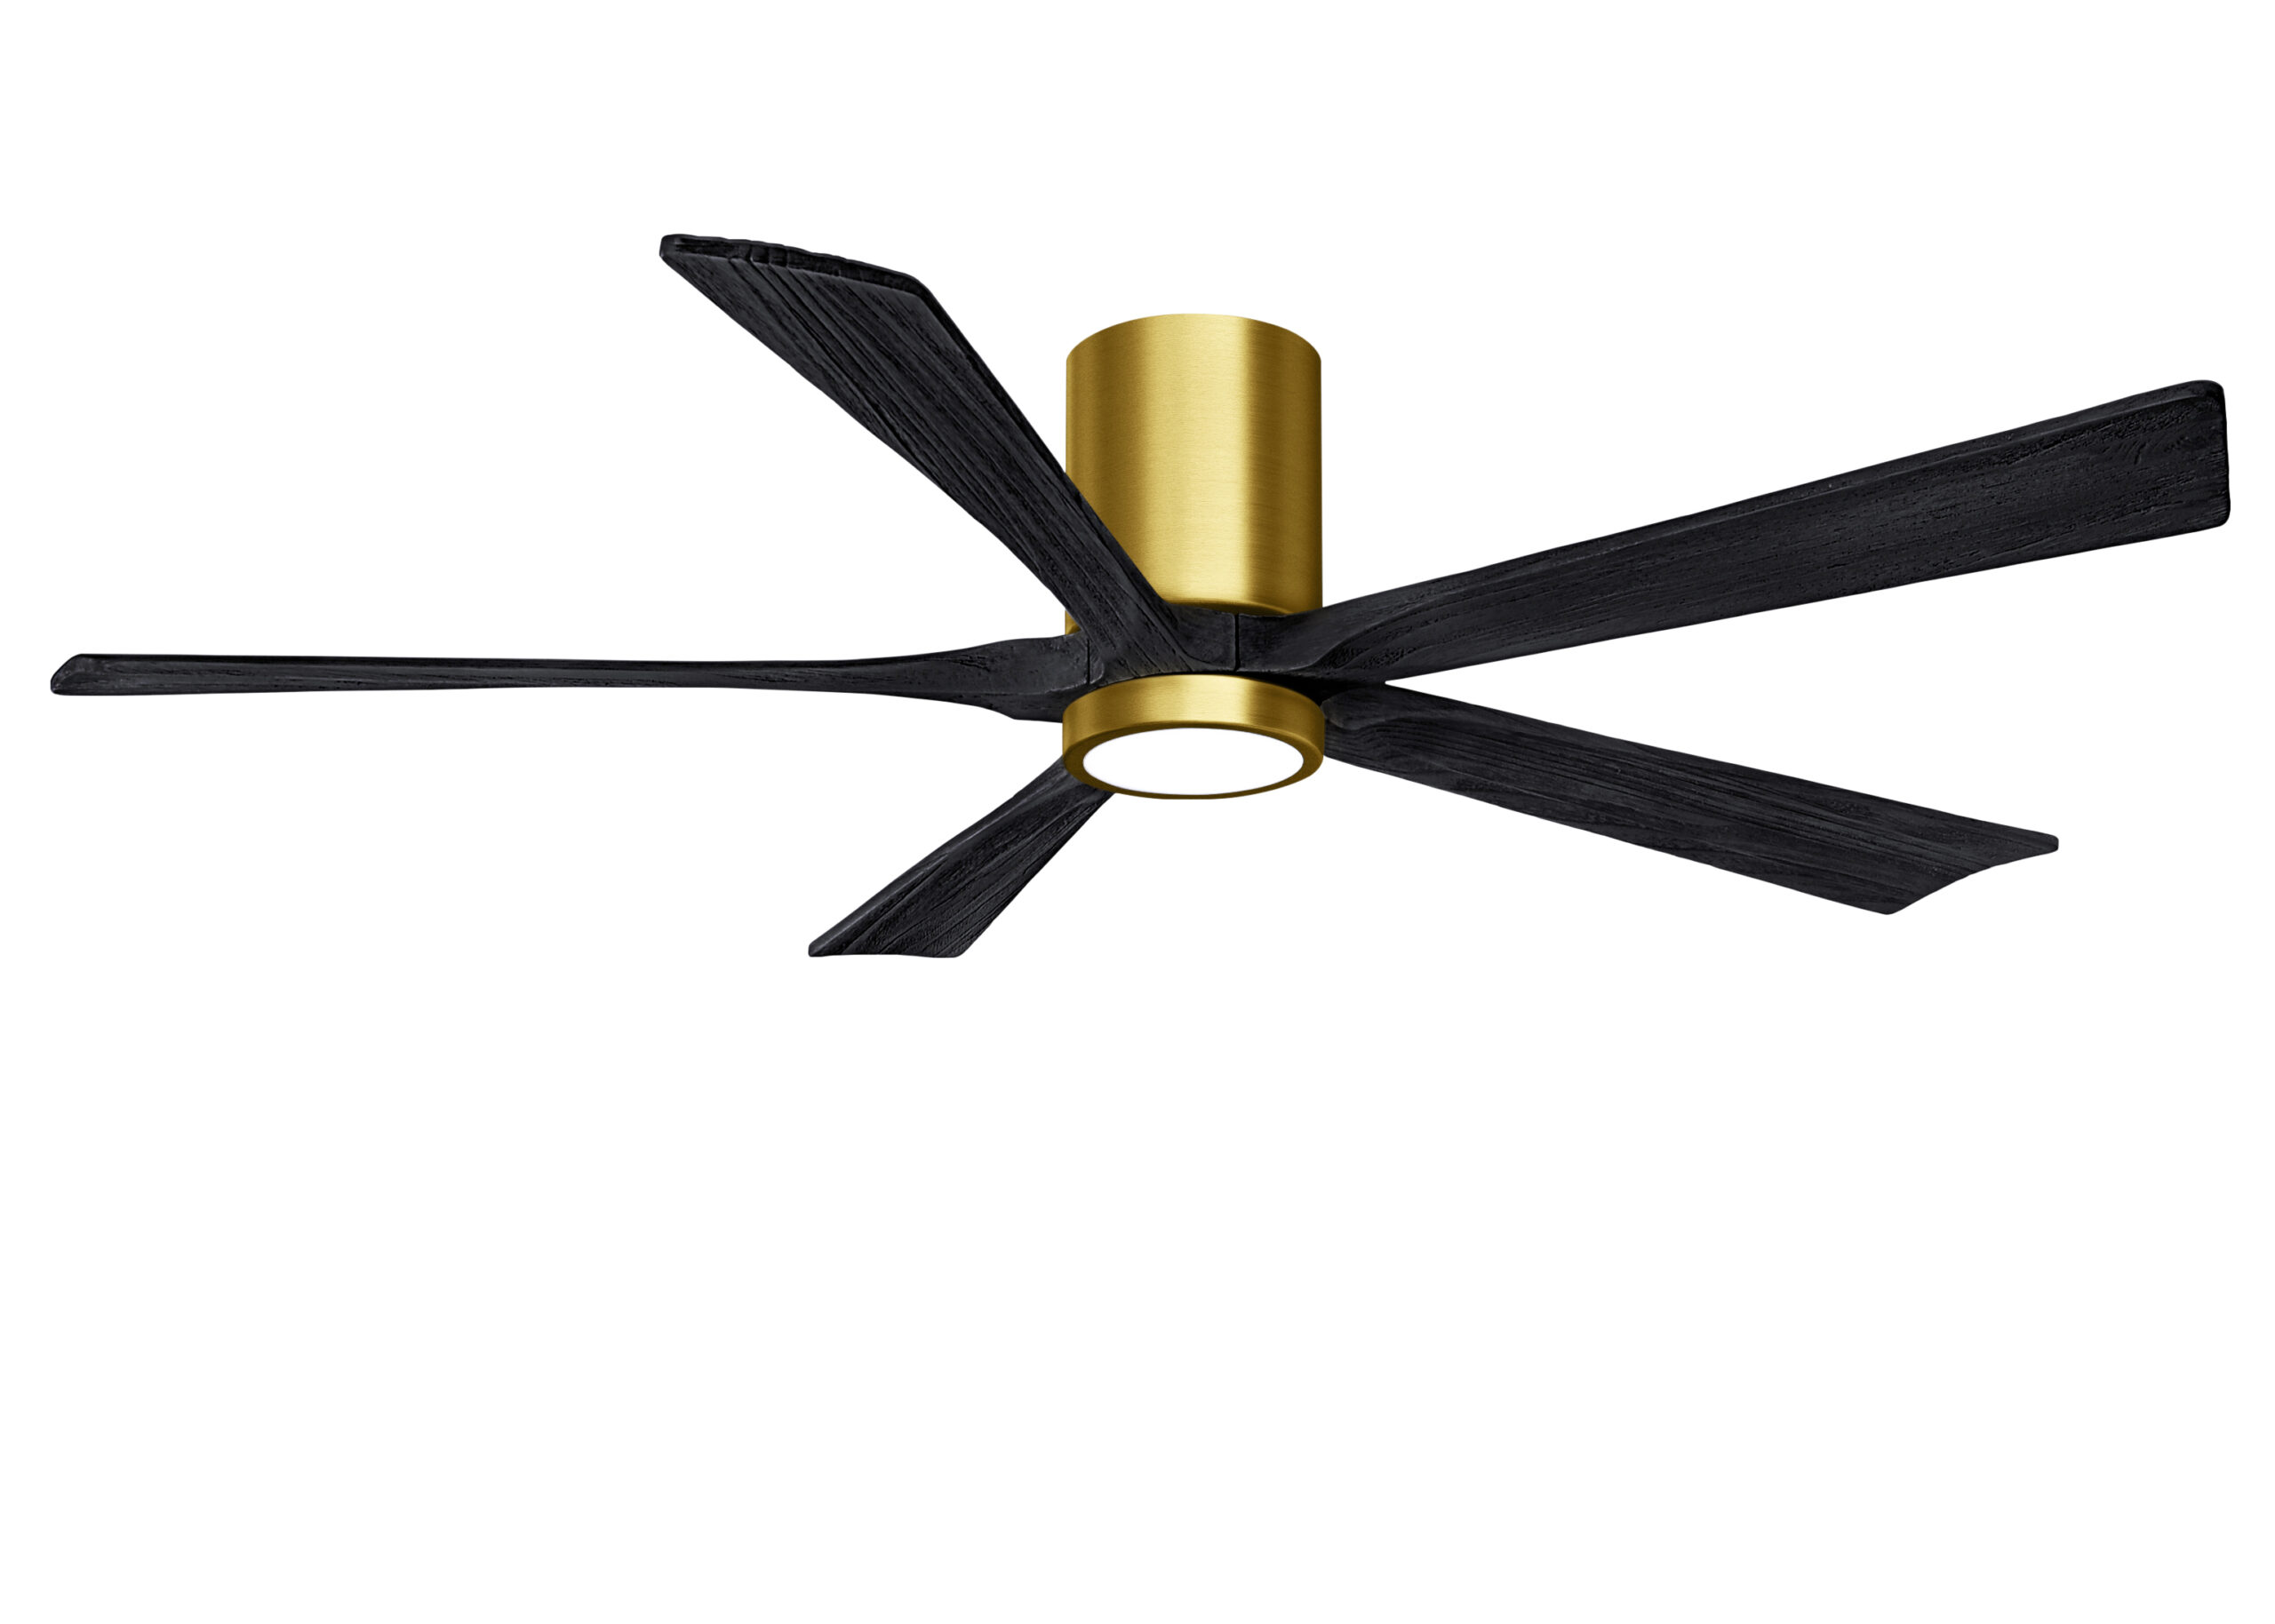 Irene-5HLK Ceiling Fan in Brushed Brass Finish with 60